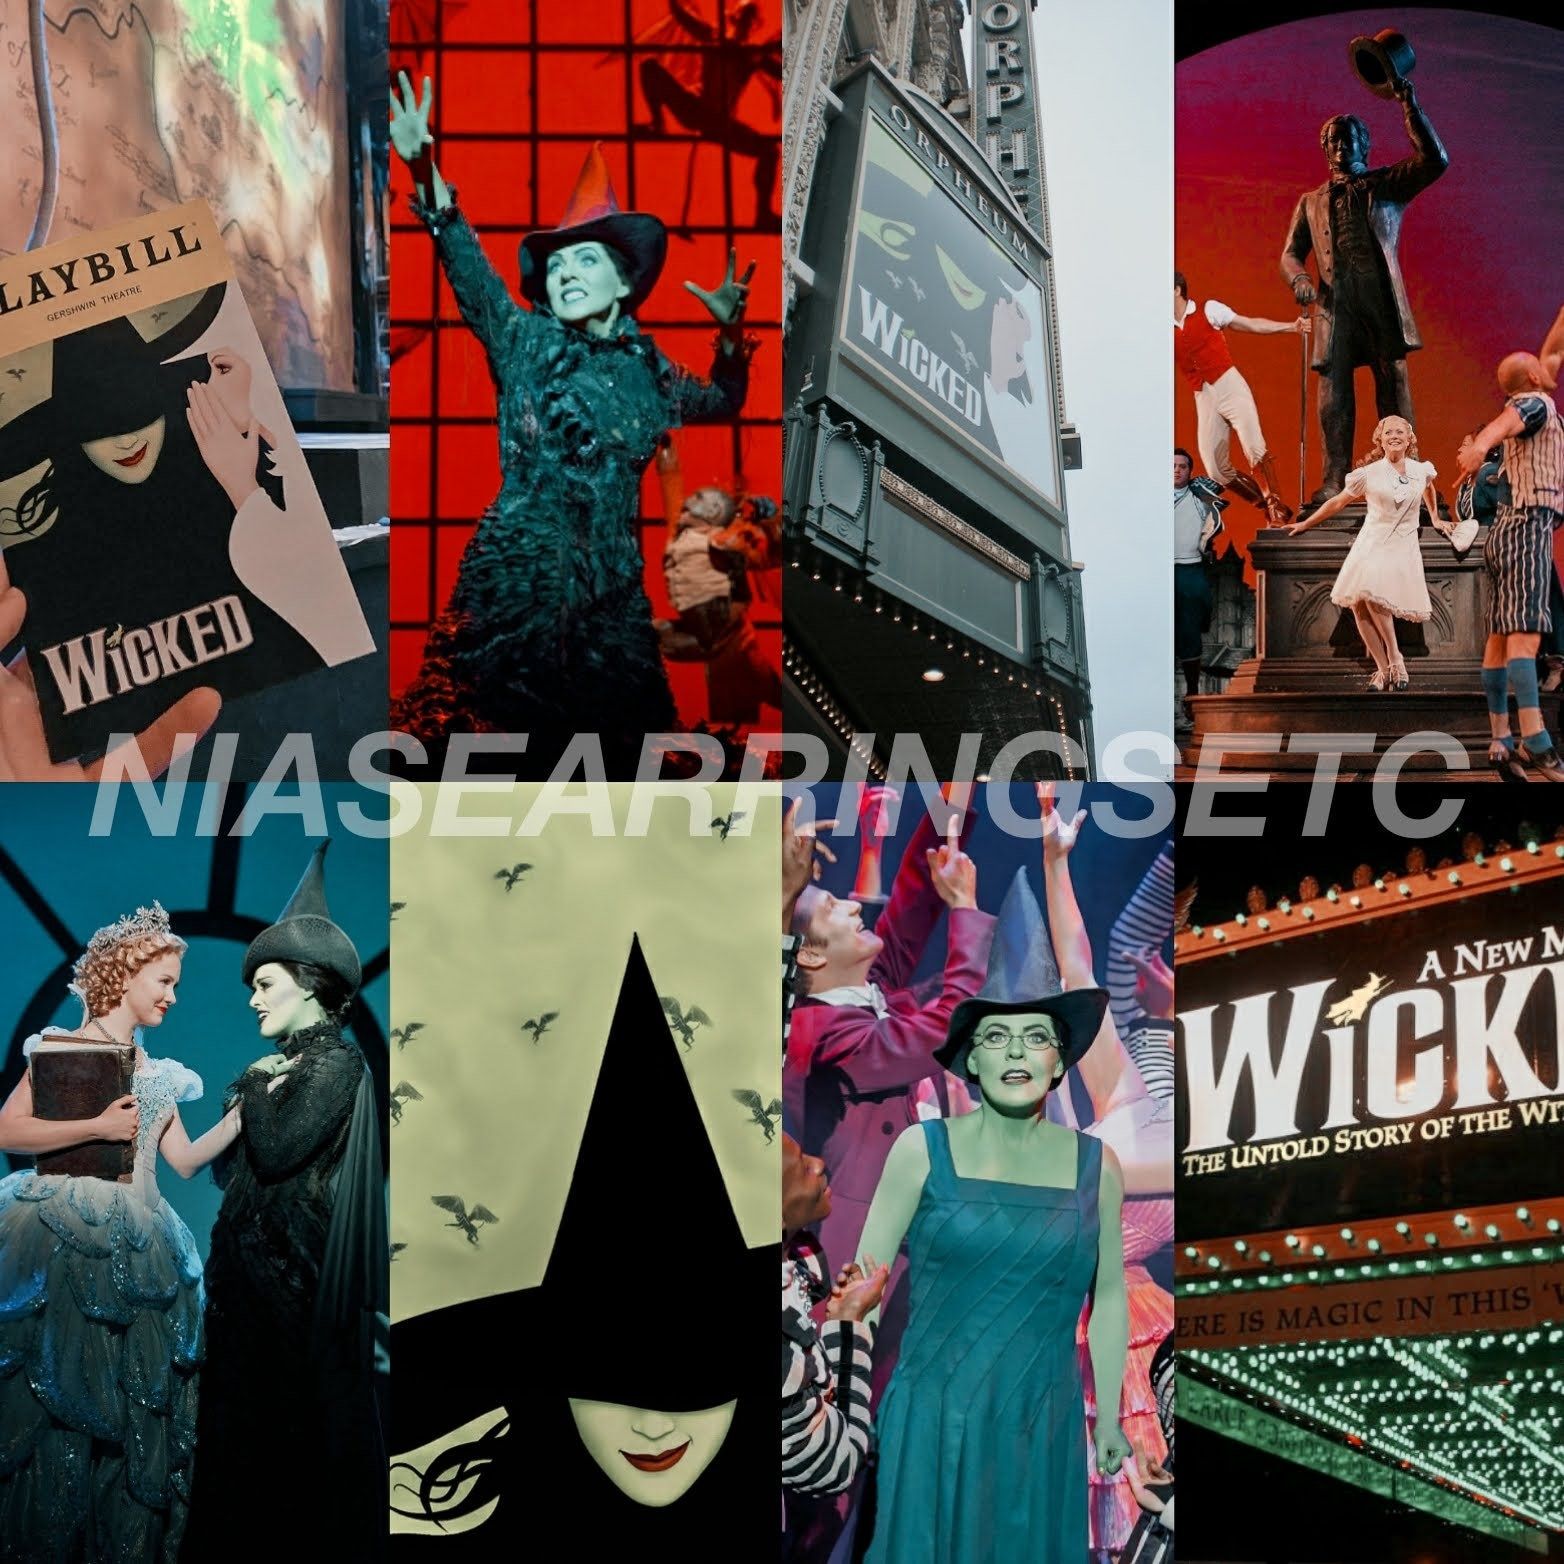 Wicked Broadway Gershwin Theatre Aesthetic Wall Collage Kit